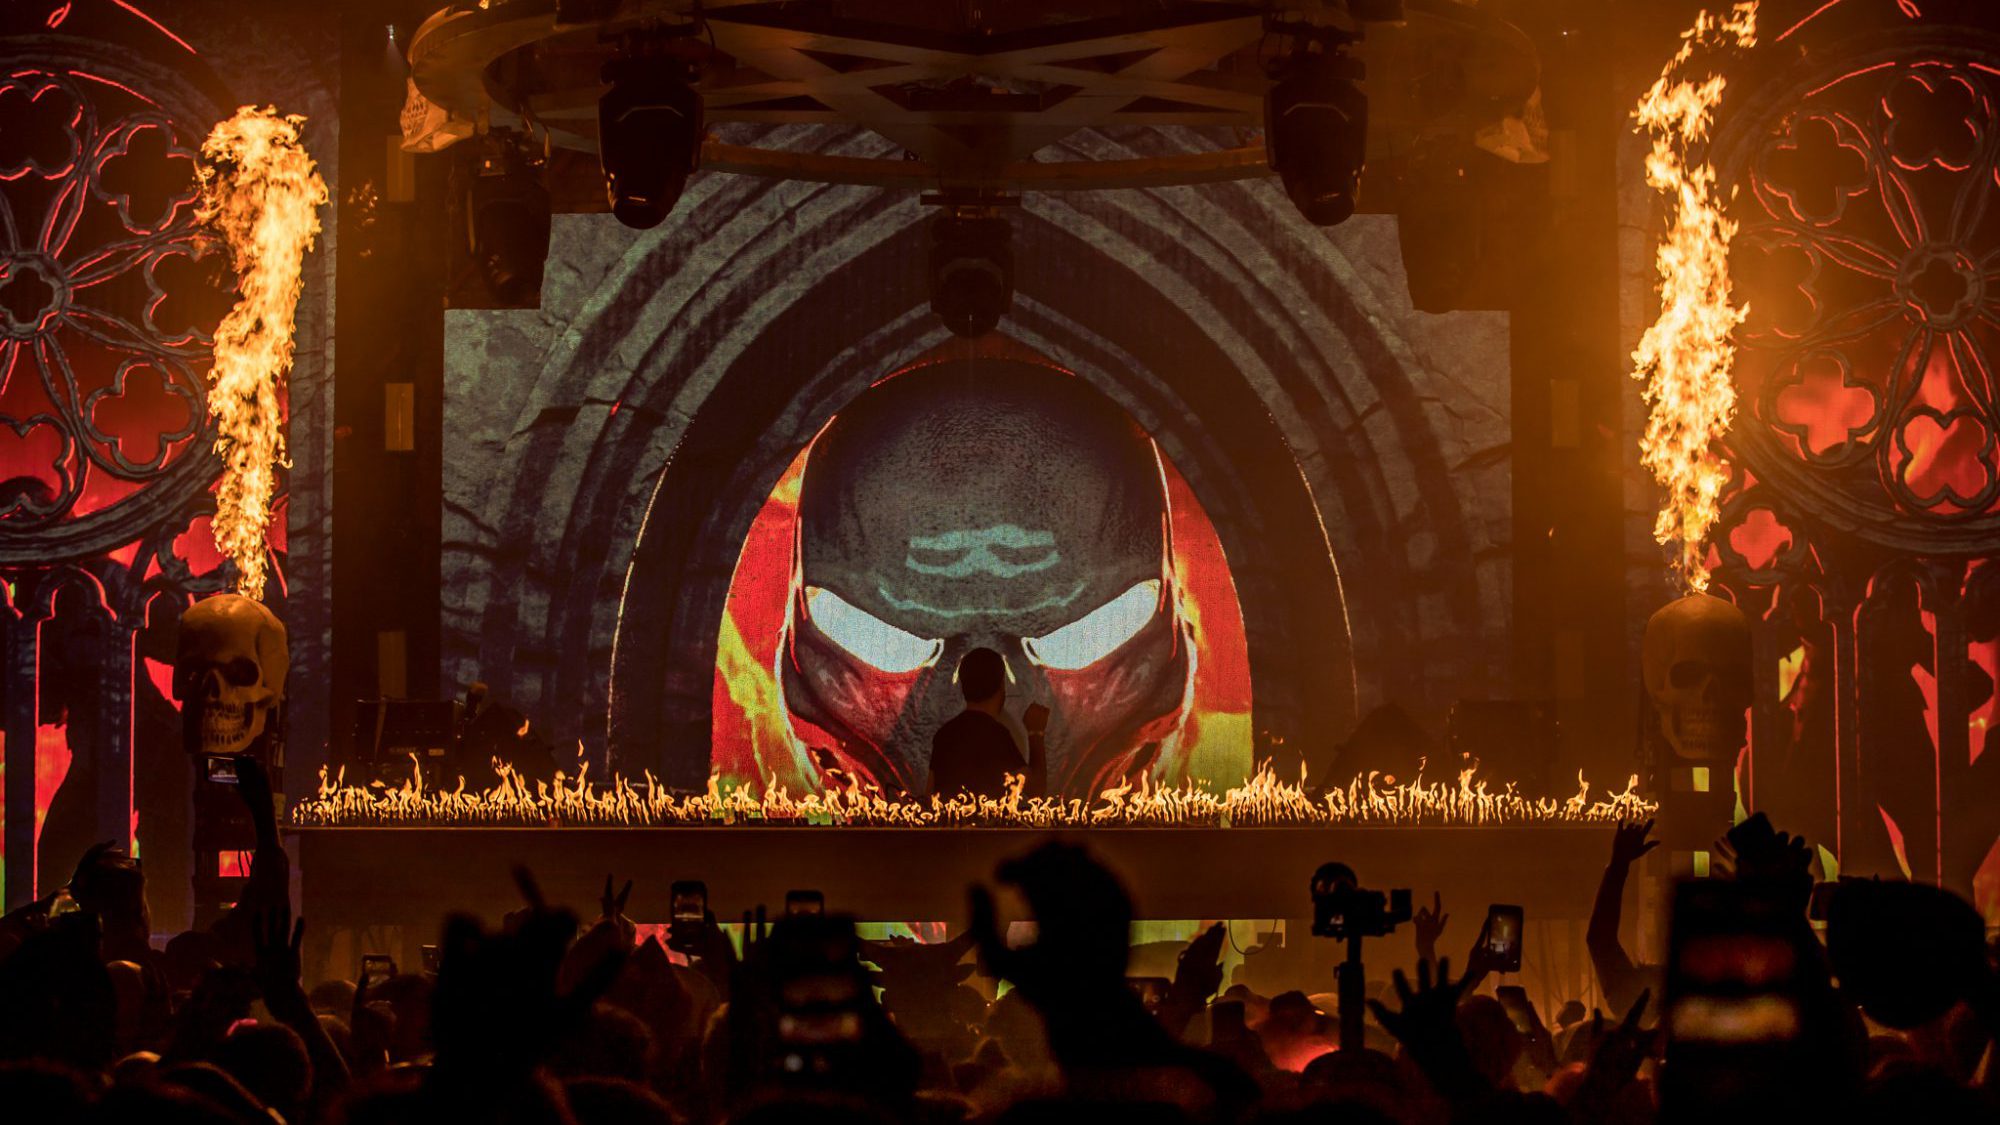 Gui Boratto on The Great Hell stage Cityfox Halloween Festival 2019